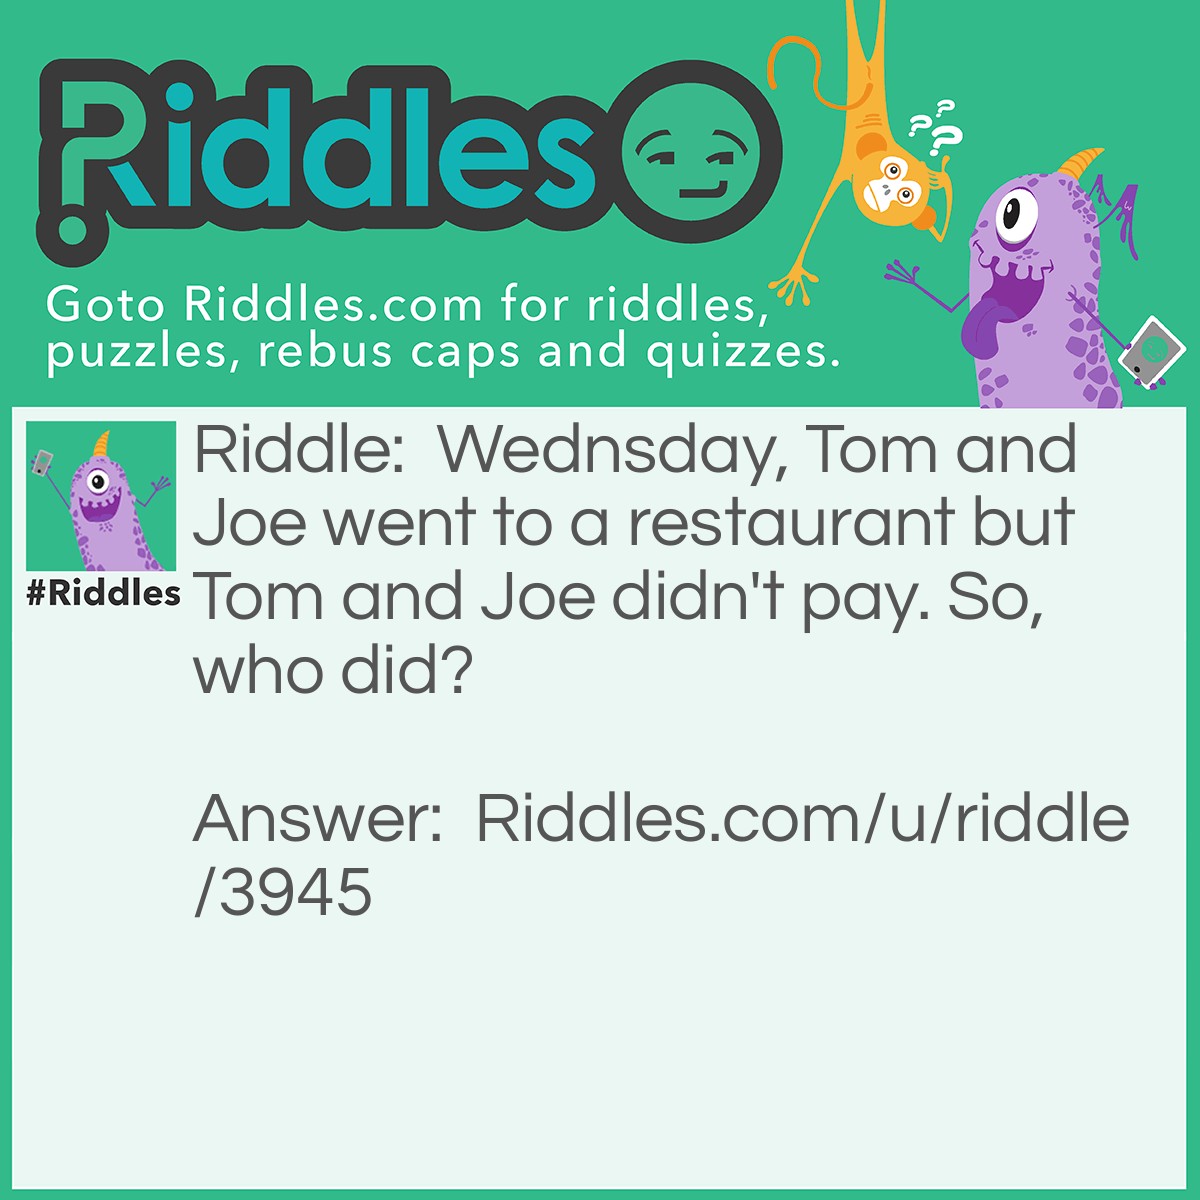 Riddle: Wednsday, Tom and Joe went to a restaurant but Tom and Joe didn't pay. So, who did? Answer: Wednsday.